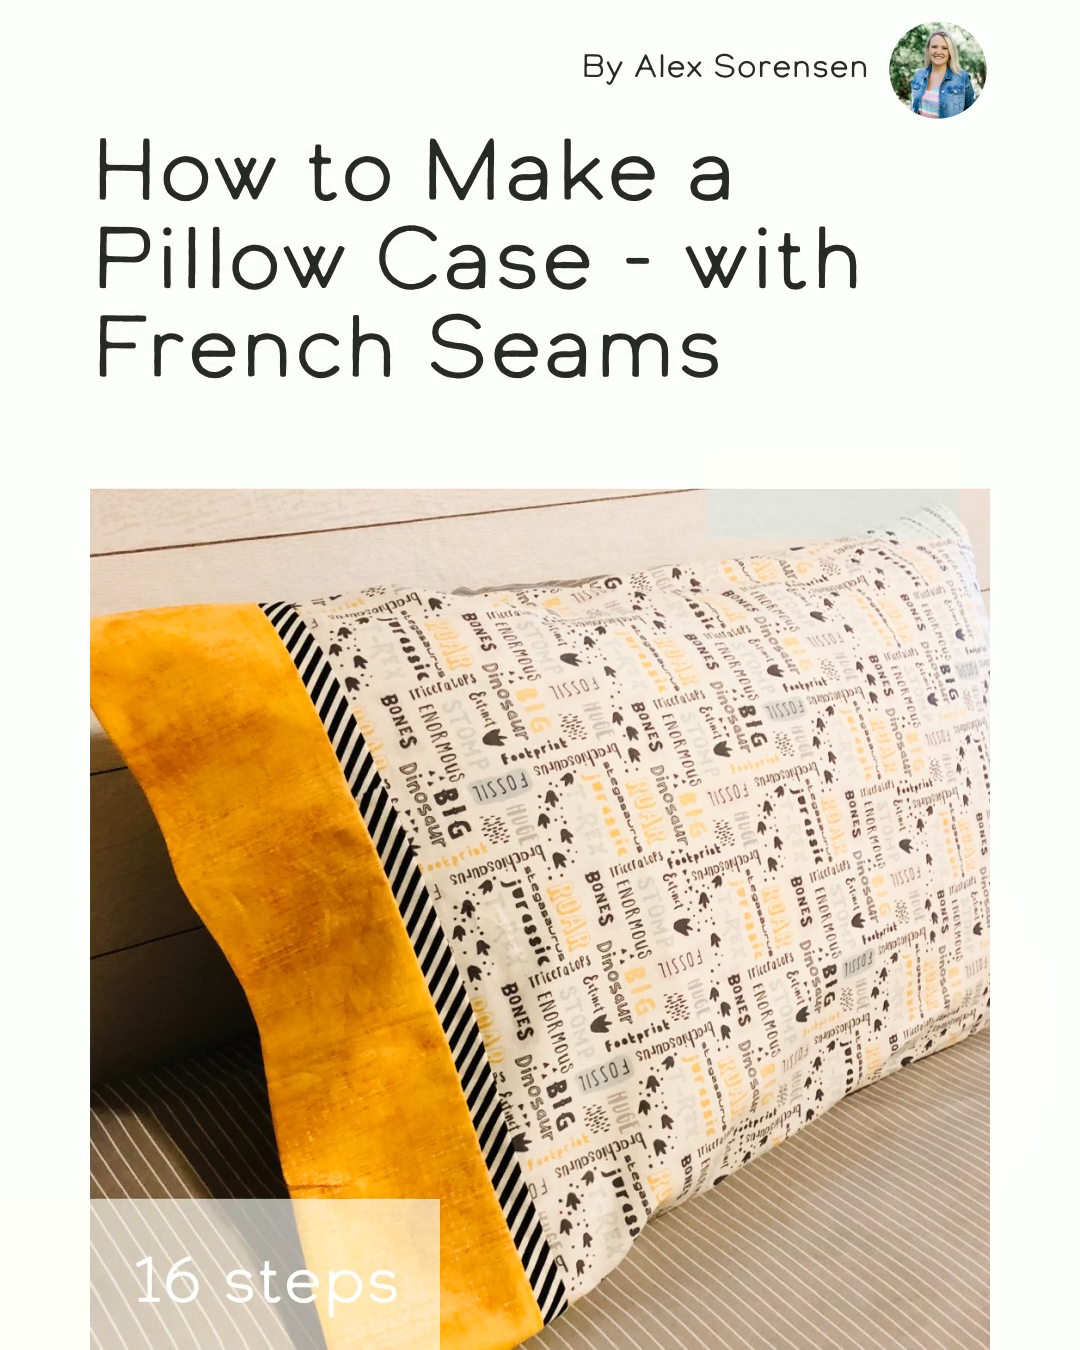 How To Make A Pillow Case - With French Seams - How To Make A Pillow Case - With French Seams -   diy Pillows case